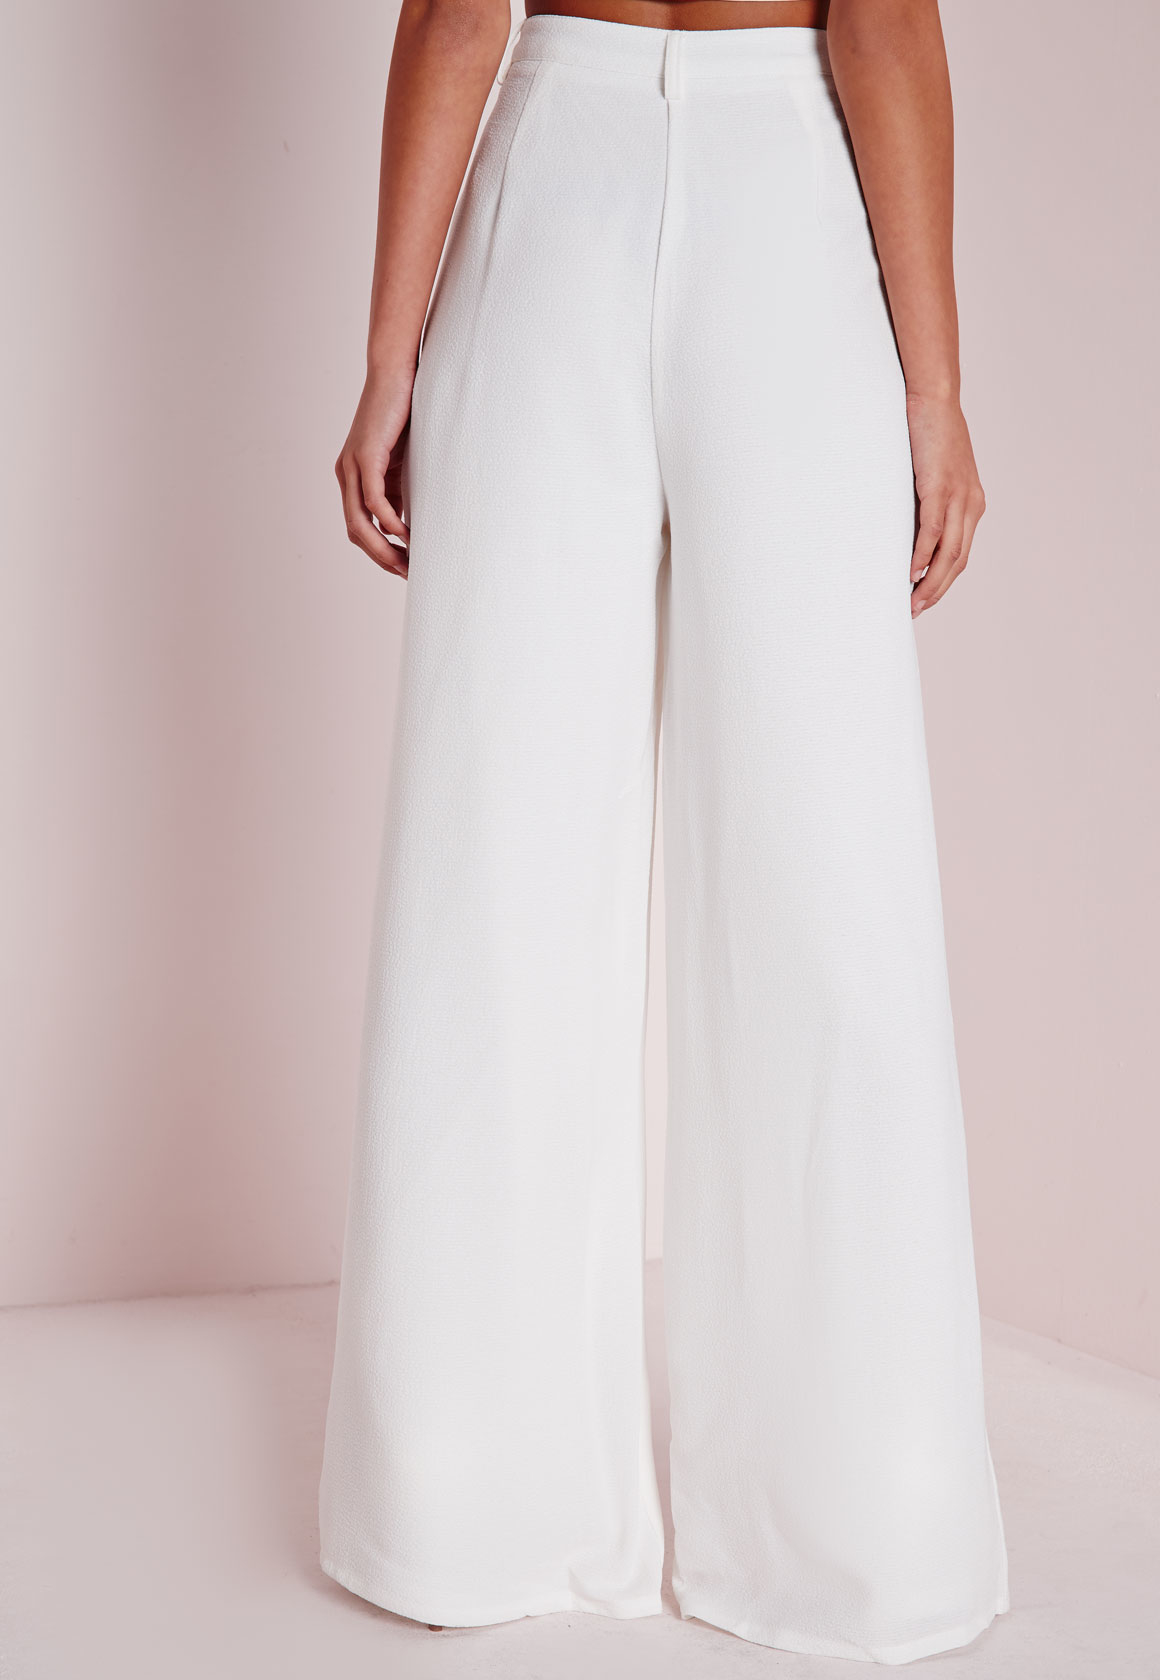 Missguided Premium Textured Crepe Wide Leg Trousers White in White | Lyst